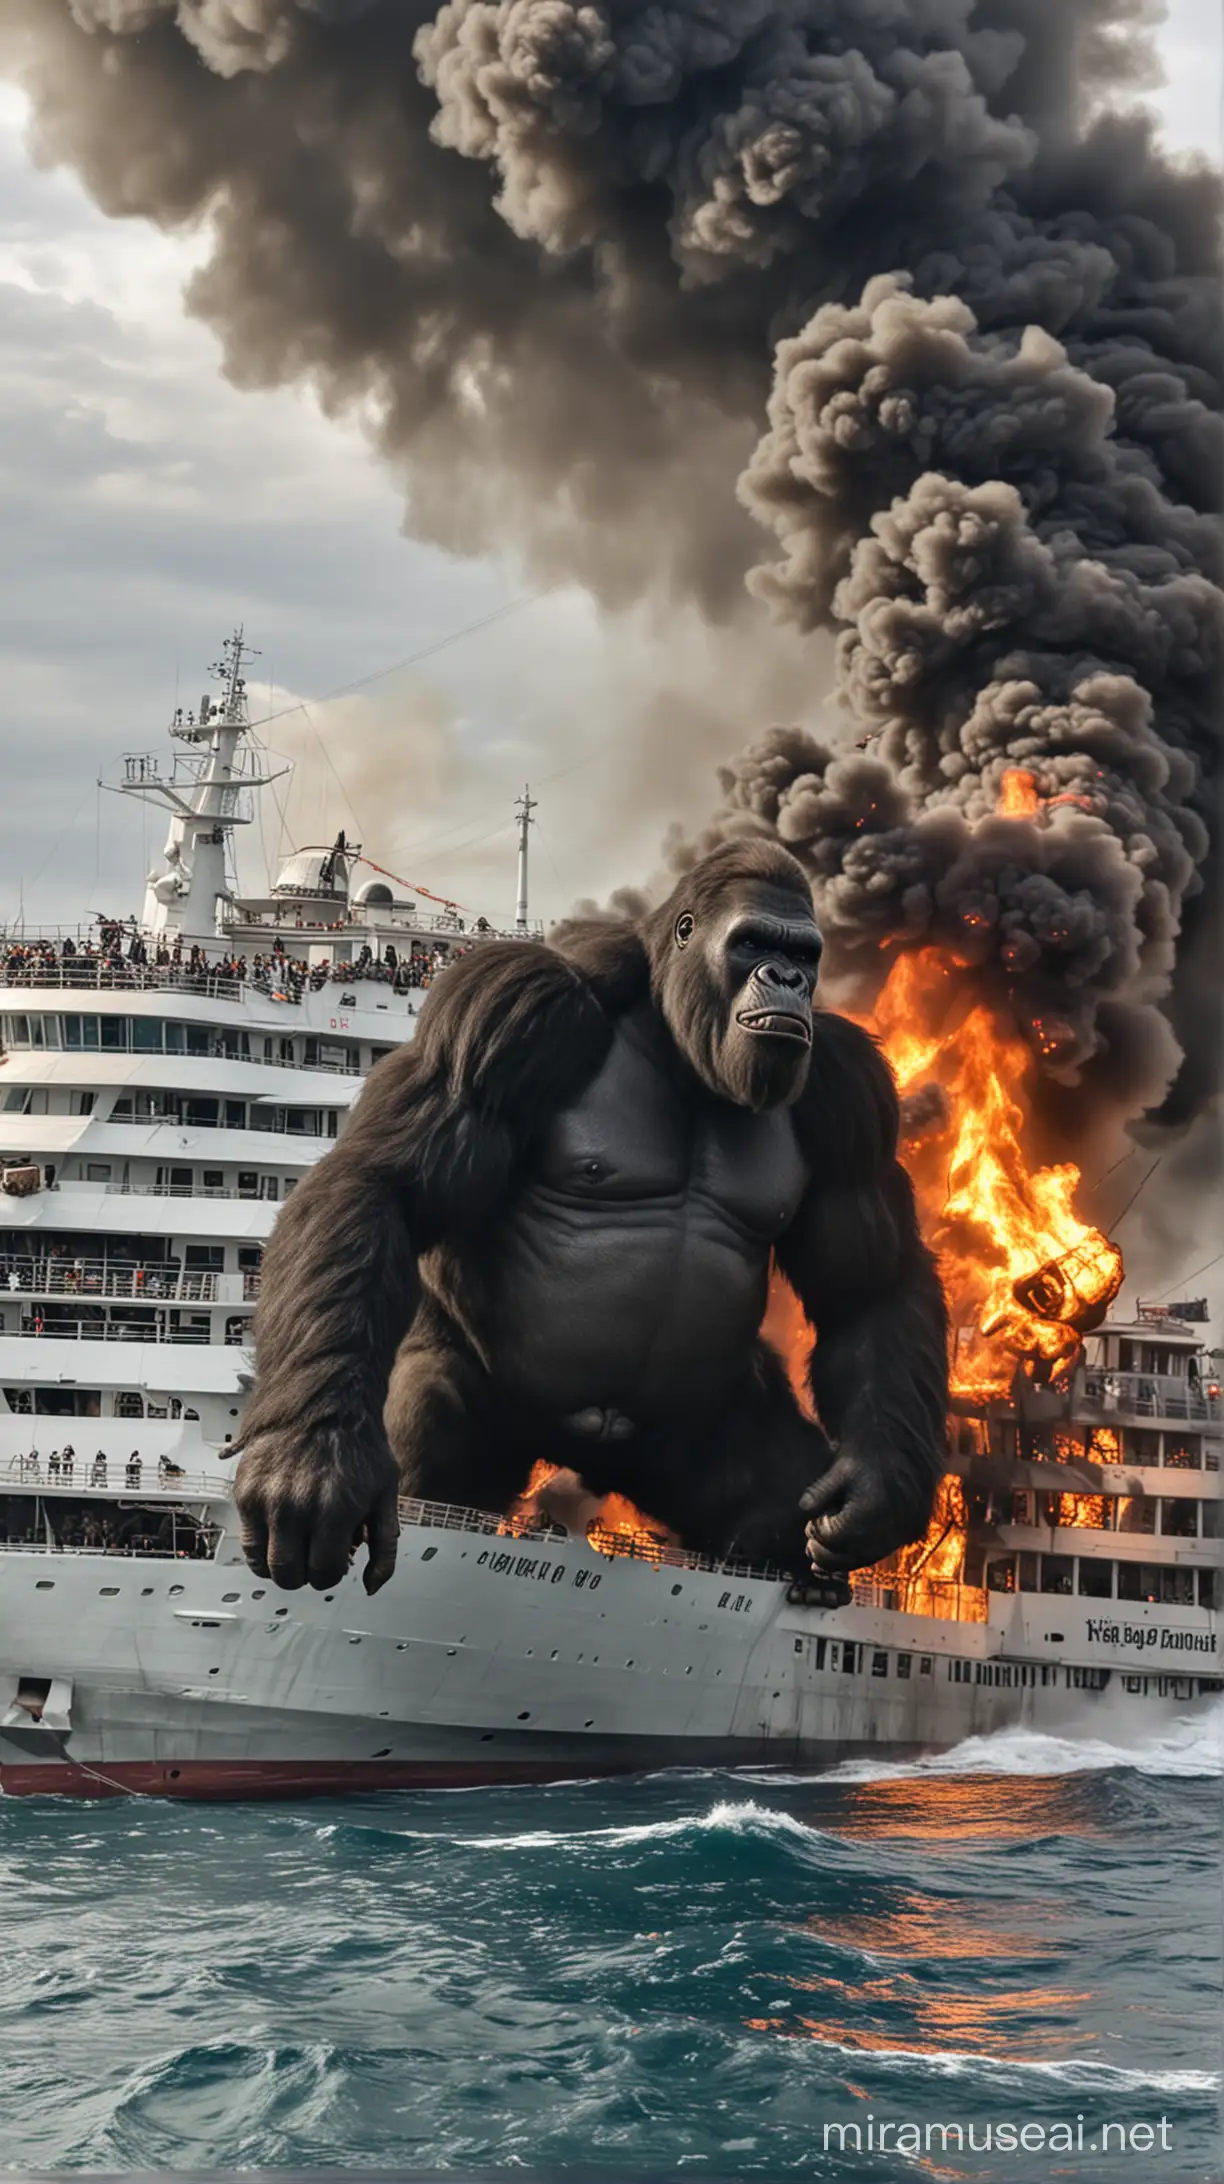 Giant Ape Rampages on Cruise Ship in the Ocean